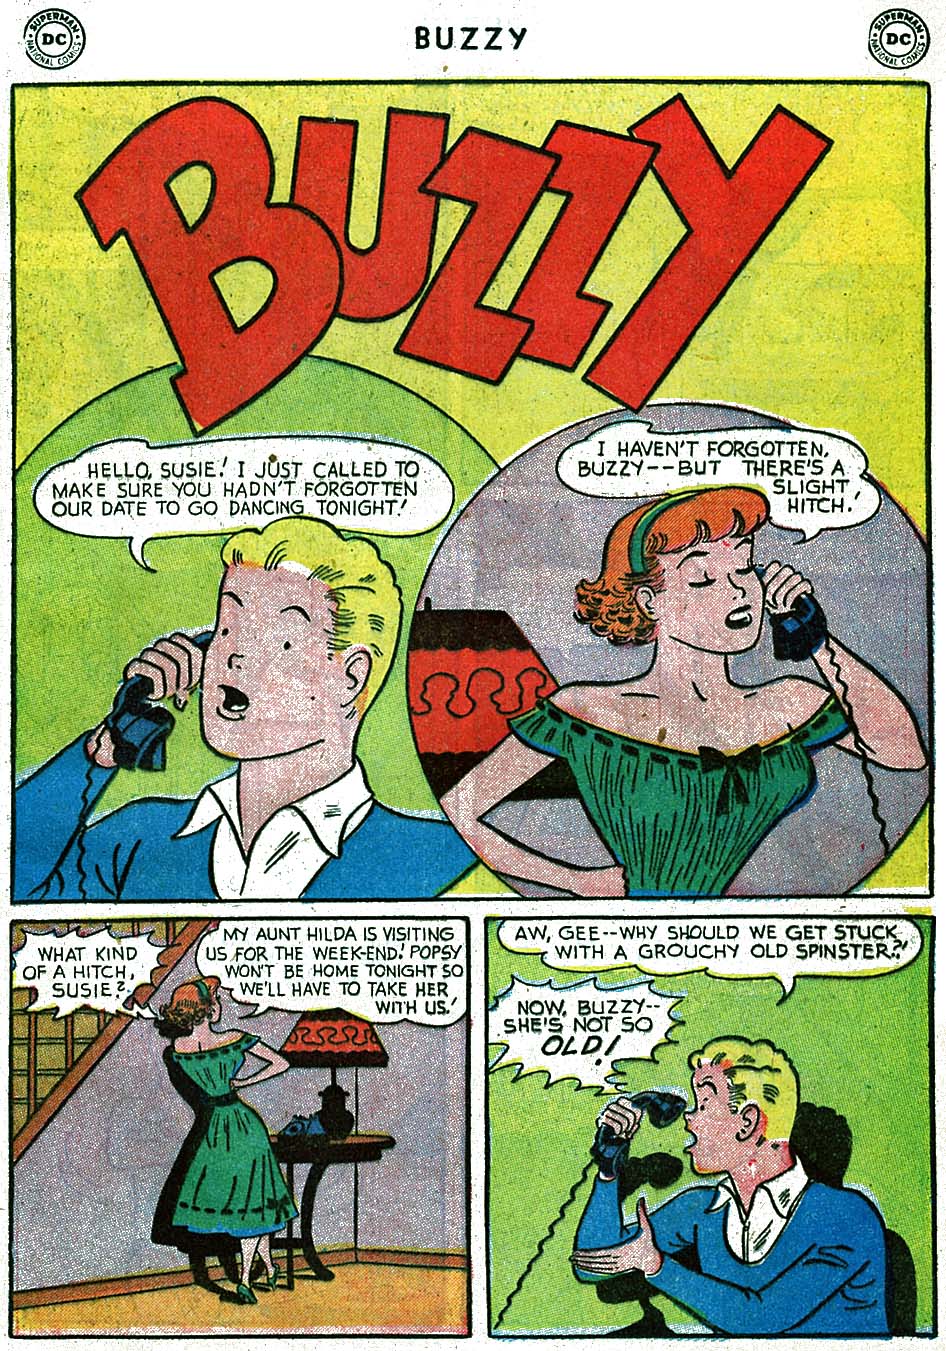 Read online Buzzy comic -  Issue #53 - 27